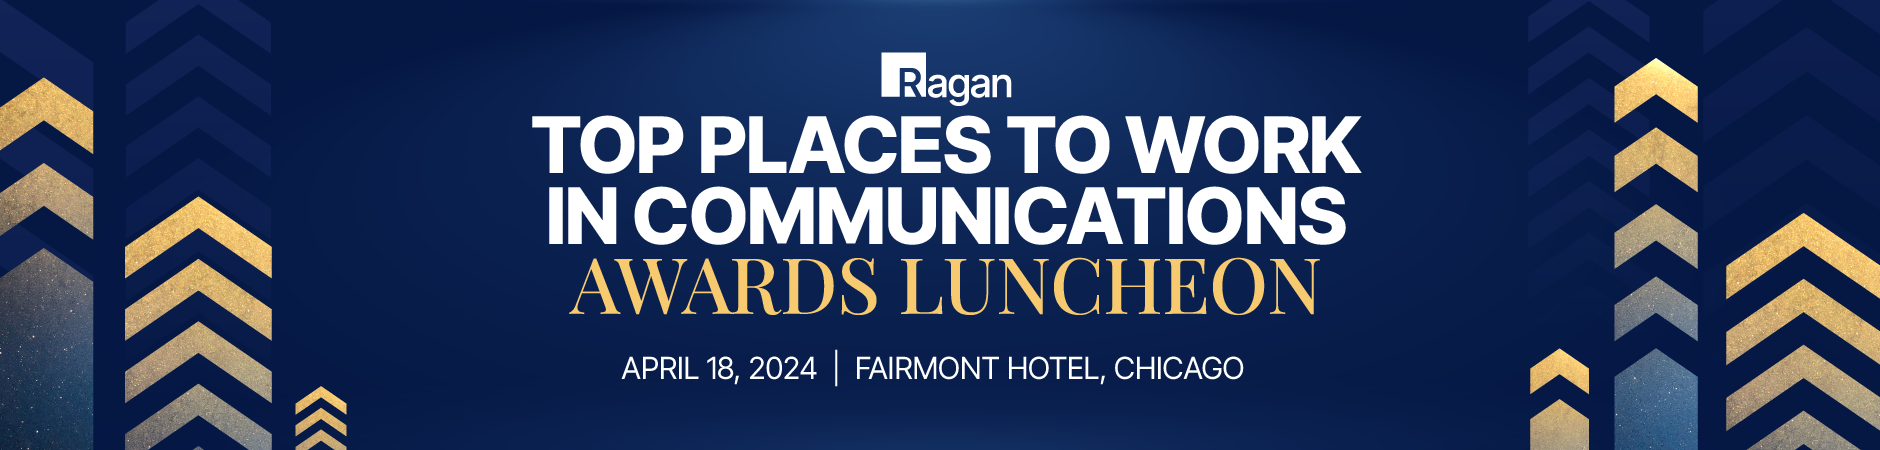 Ragan’s Top Places to Work Awards Luncheon 2024 